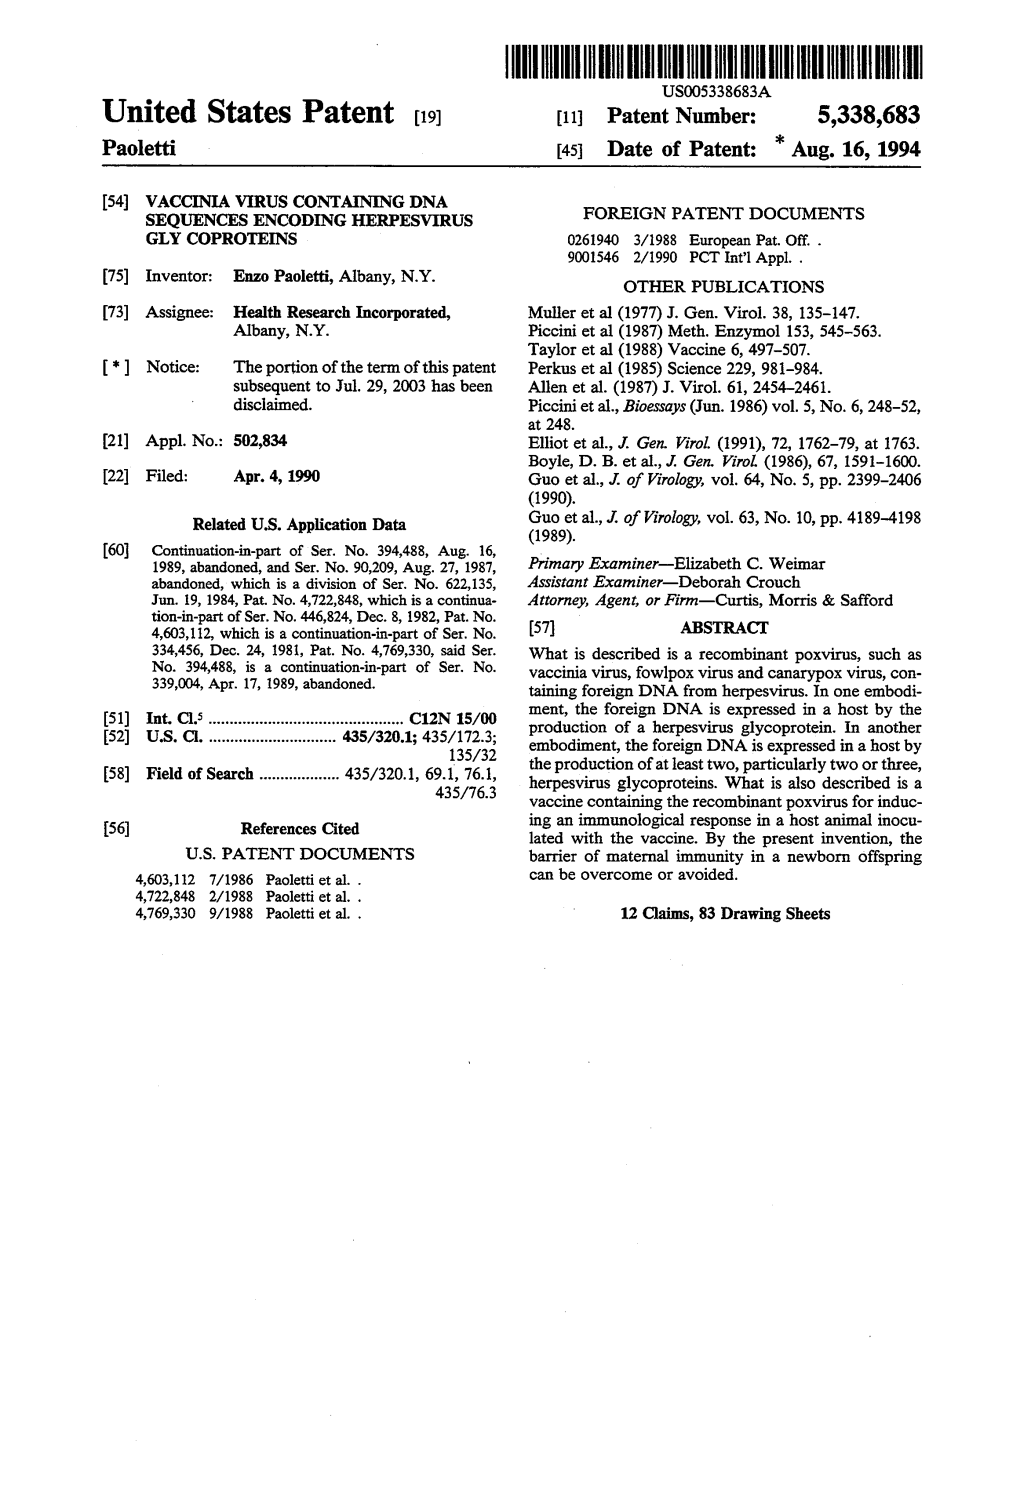 United States Patent (19) 11 Patent Number: 5,338,683 Paoletti (45) Date of Patent: "Aug